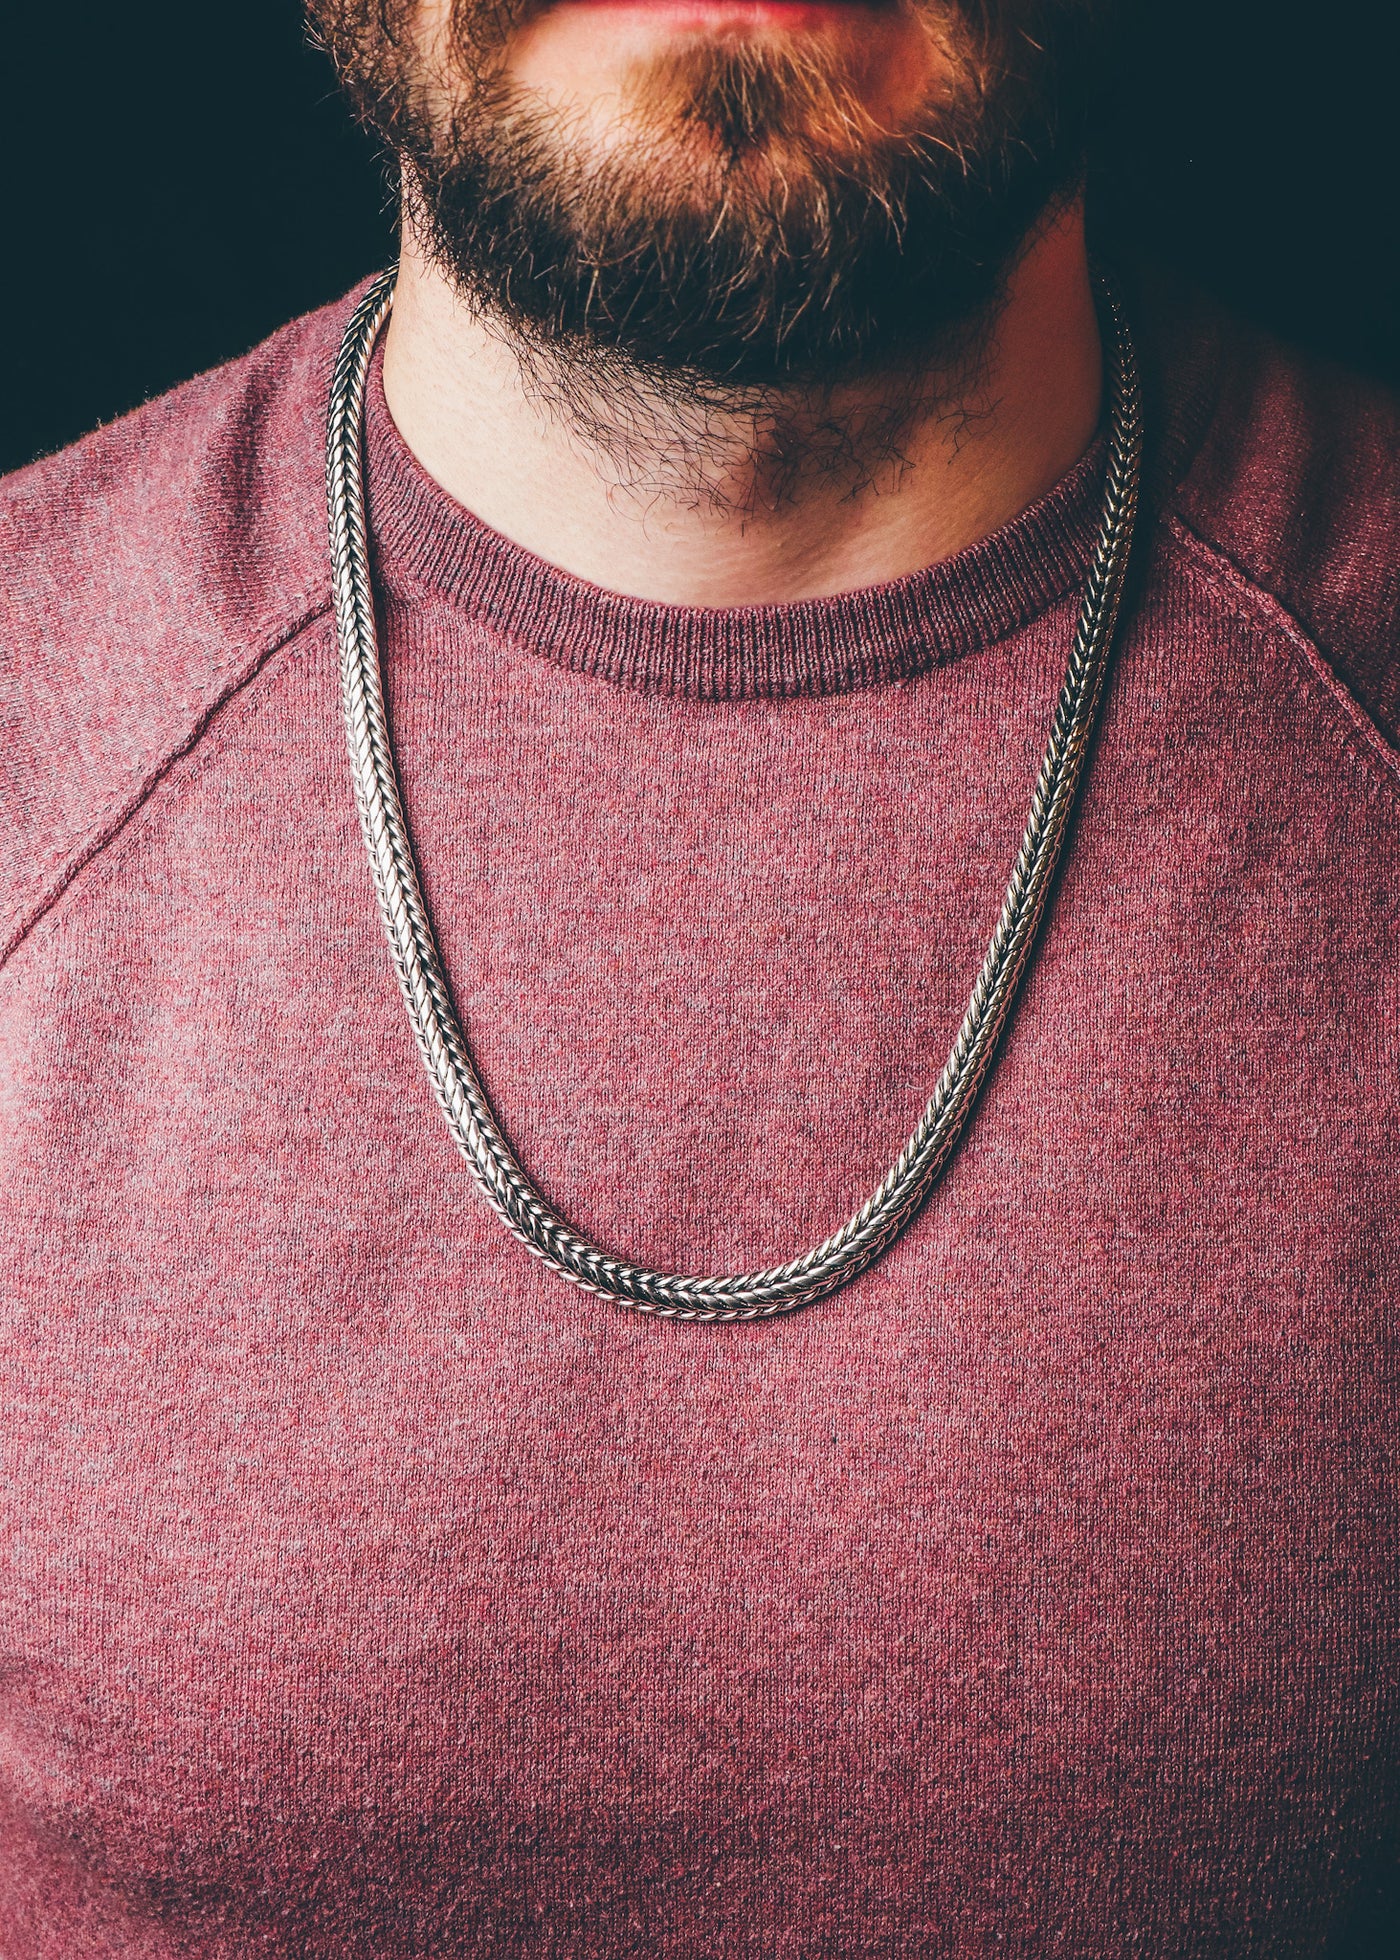 Heavy Foxtail silver chain